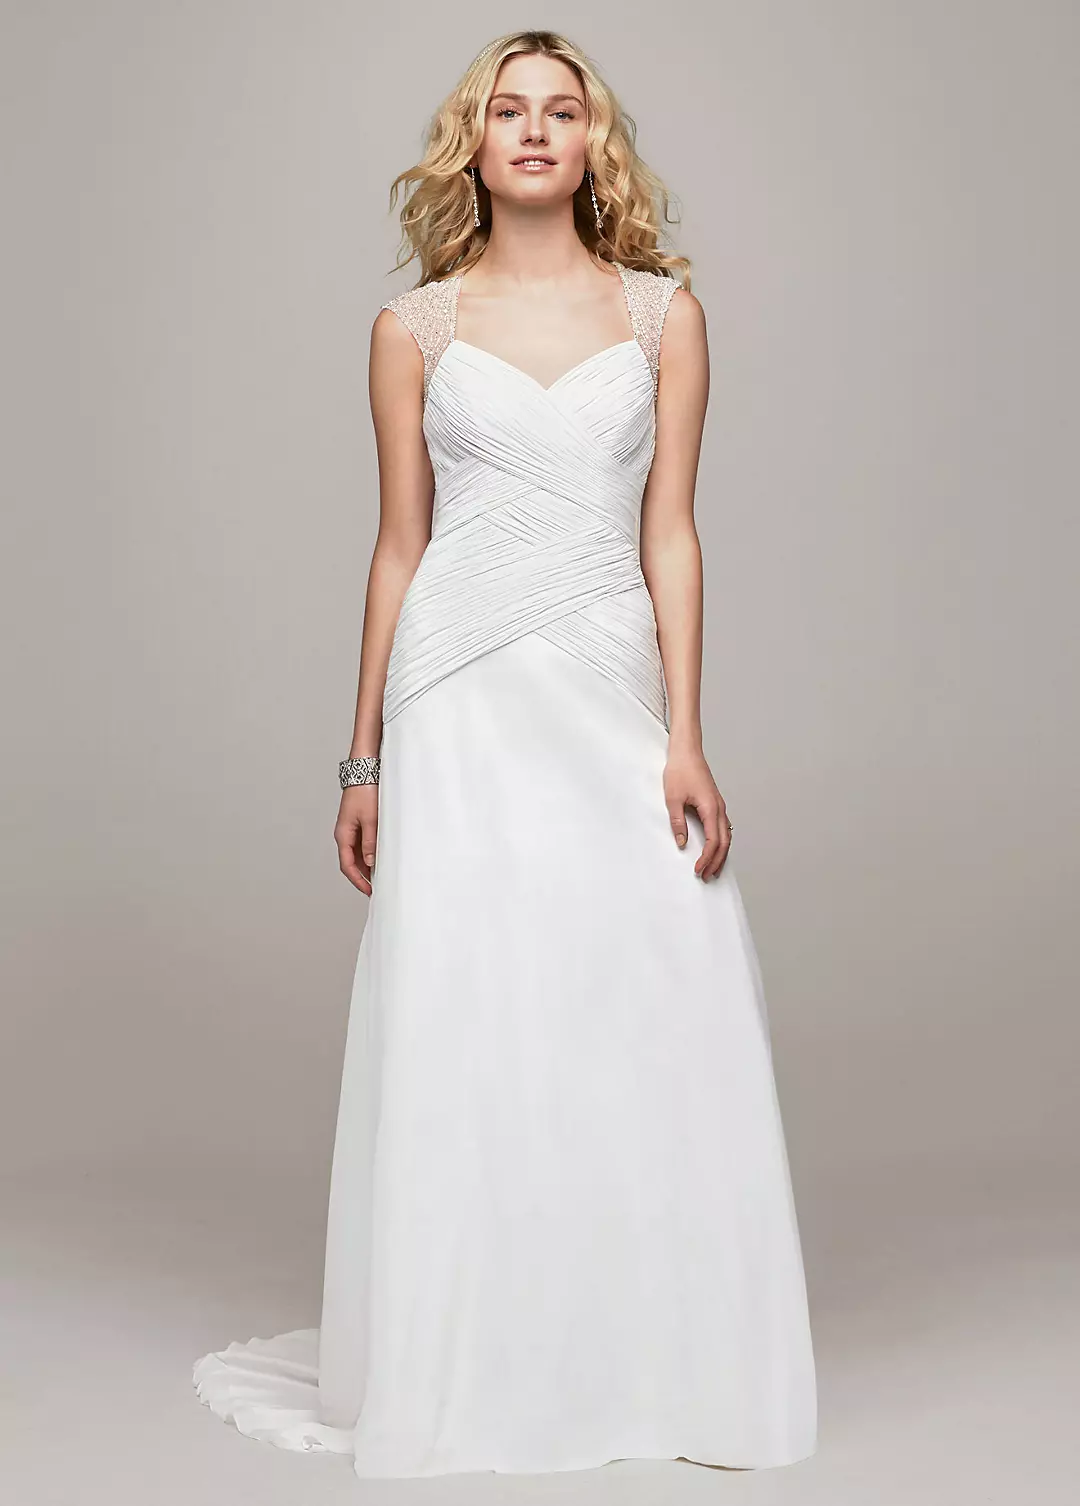 A-Line Wedding Dress with Beaded Cap Sleeve Detail Image